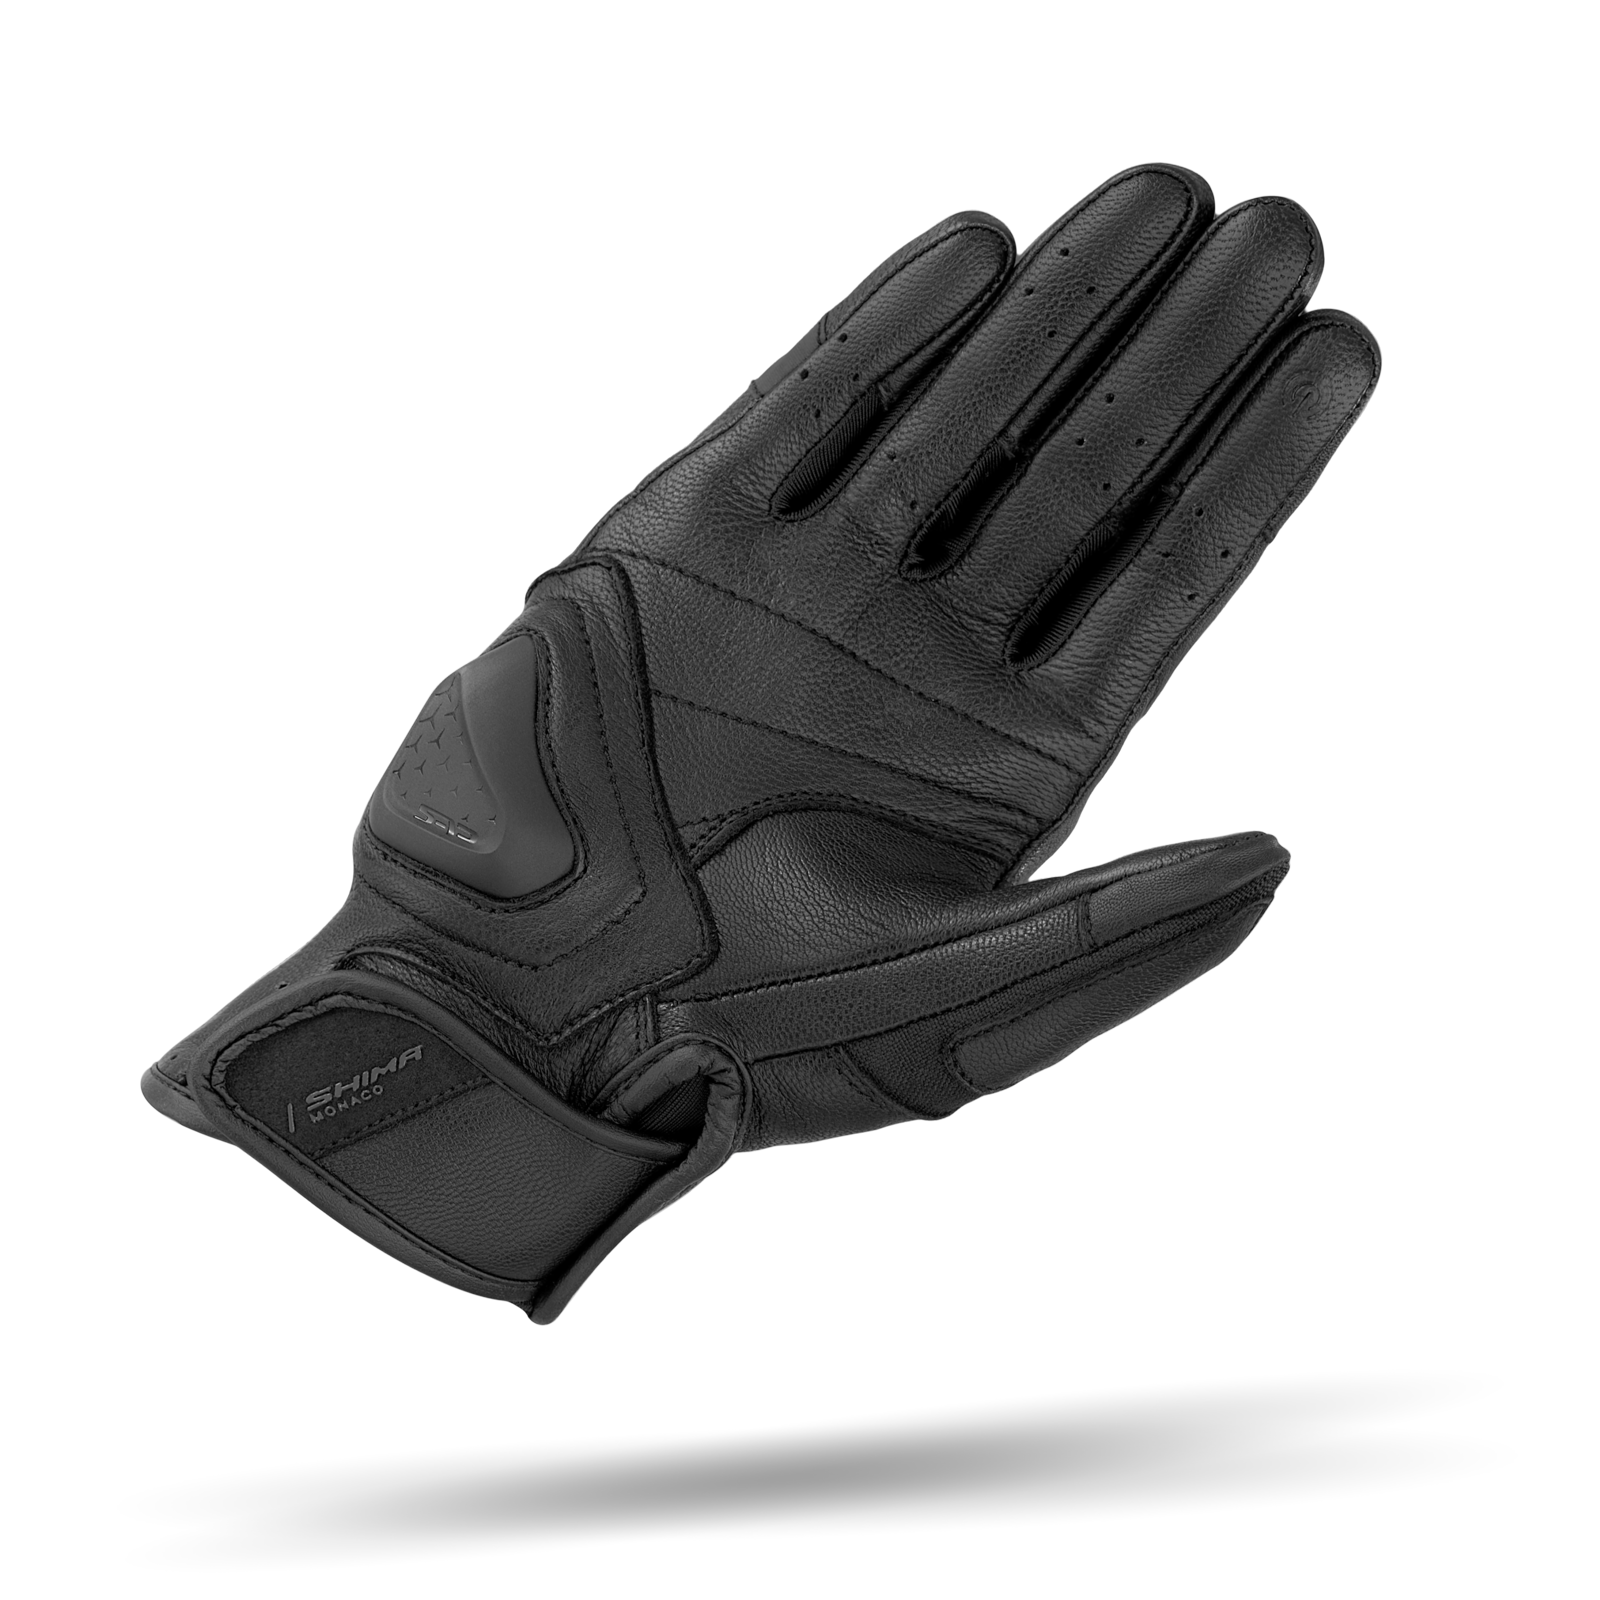 a palm of a Black leather women's motorcycle gloves from Shima